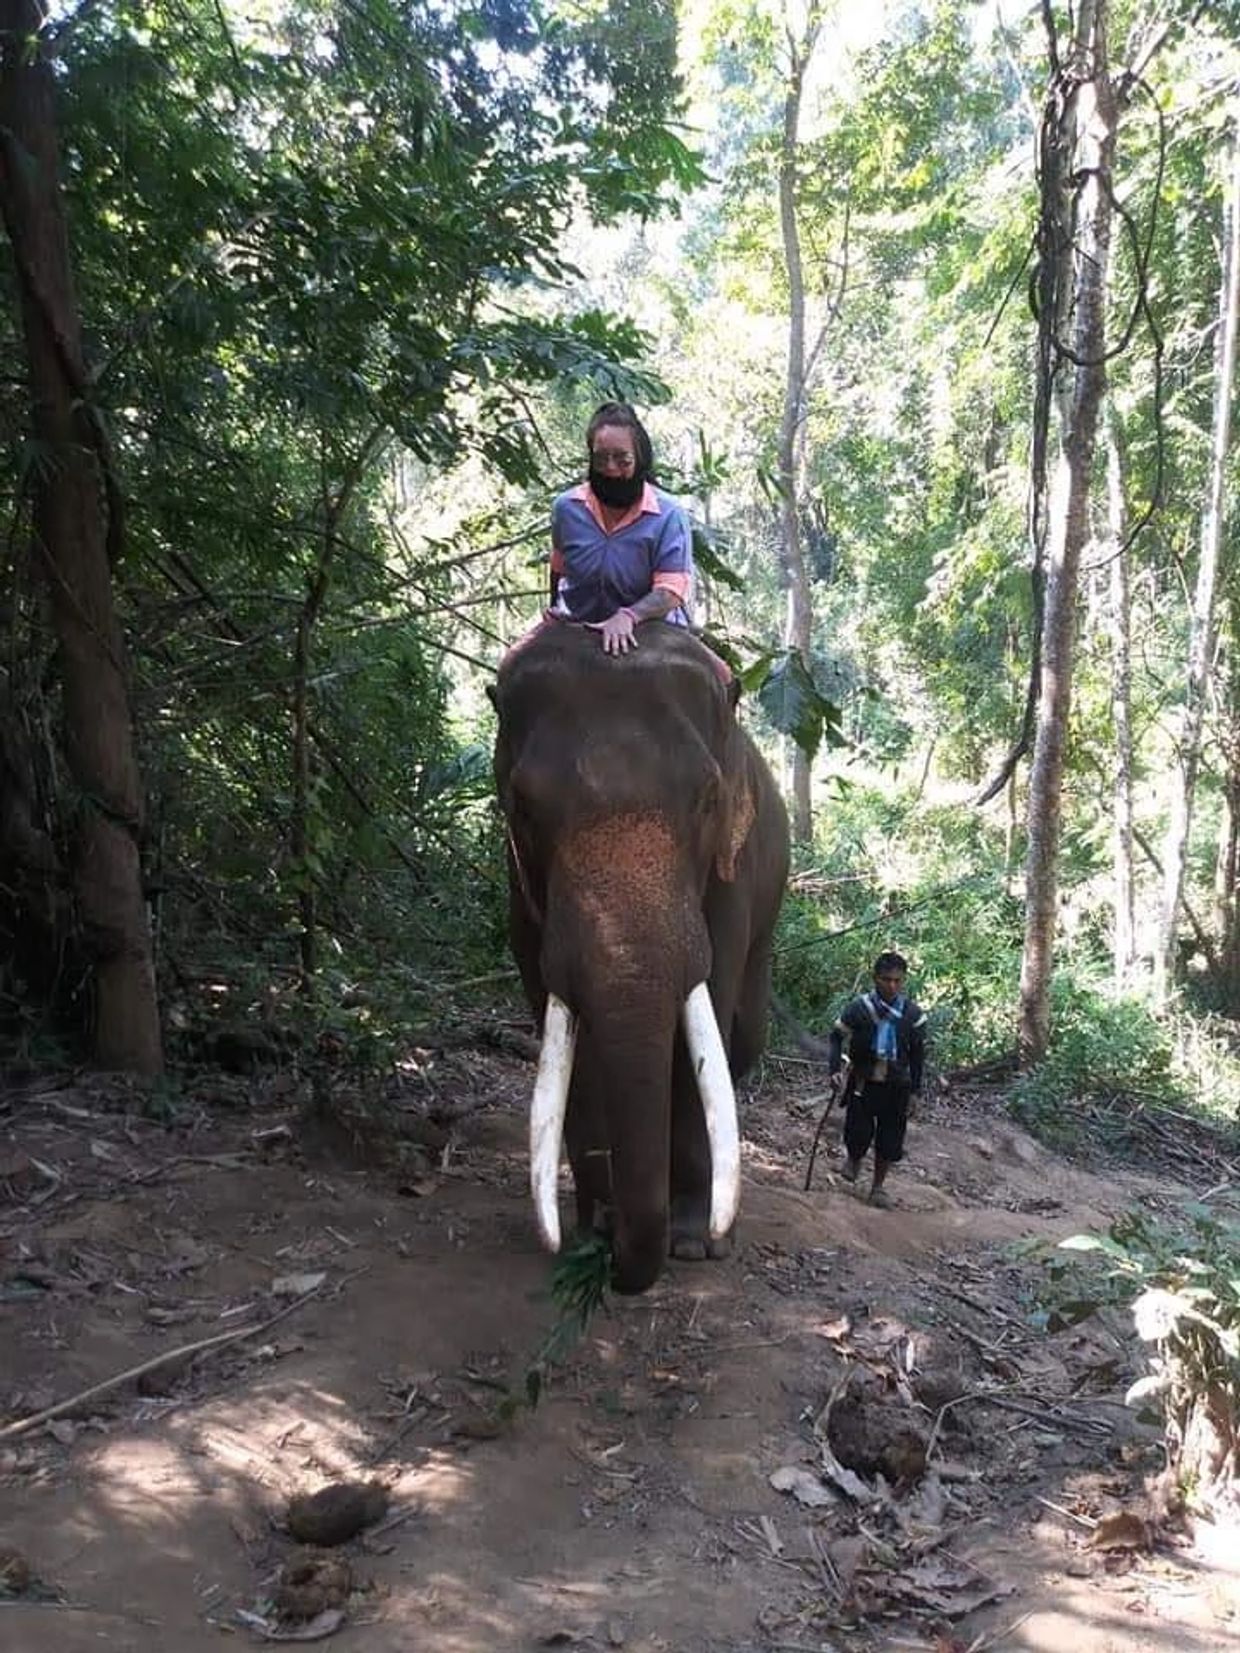 Trekking in the Majestic Asian jungle with this beautiful rescue elephant!!